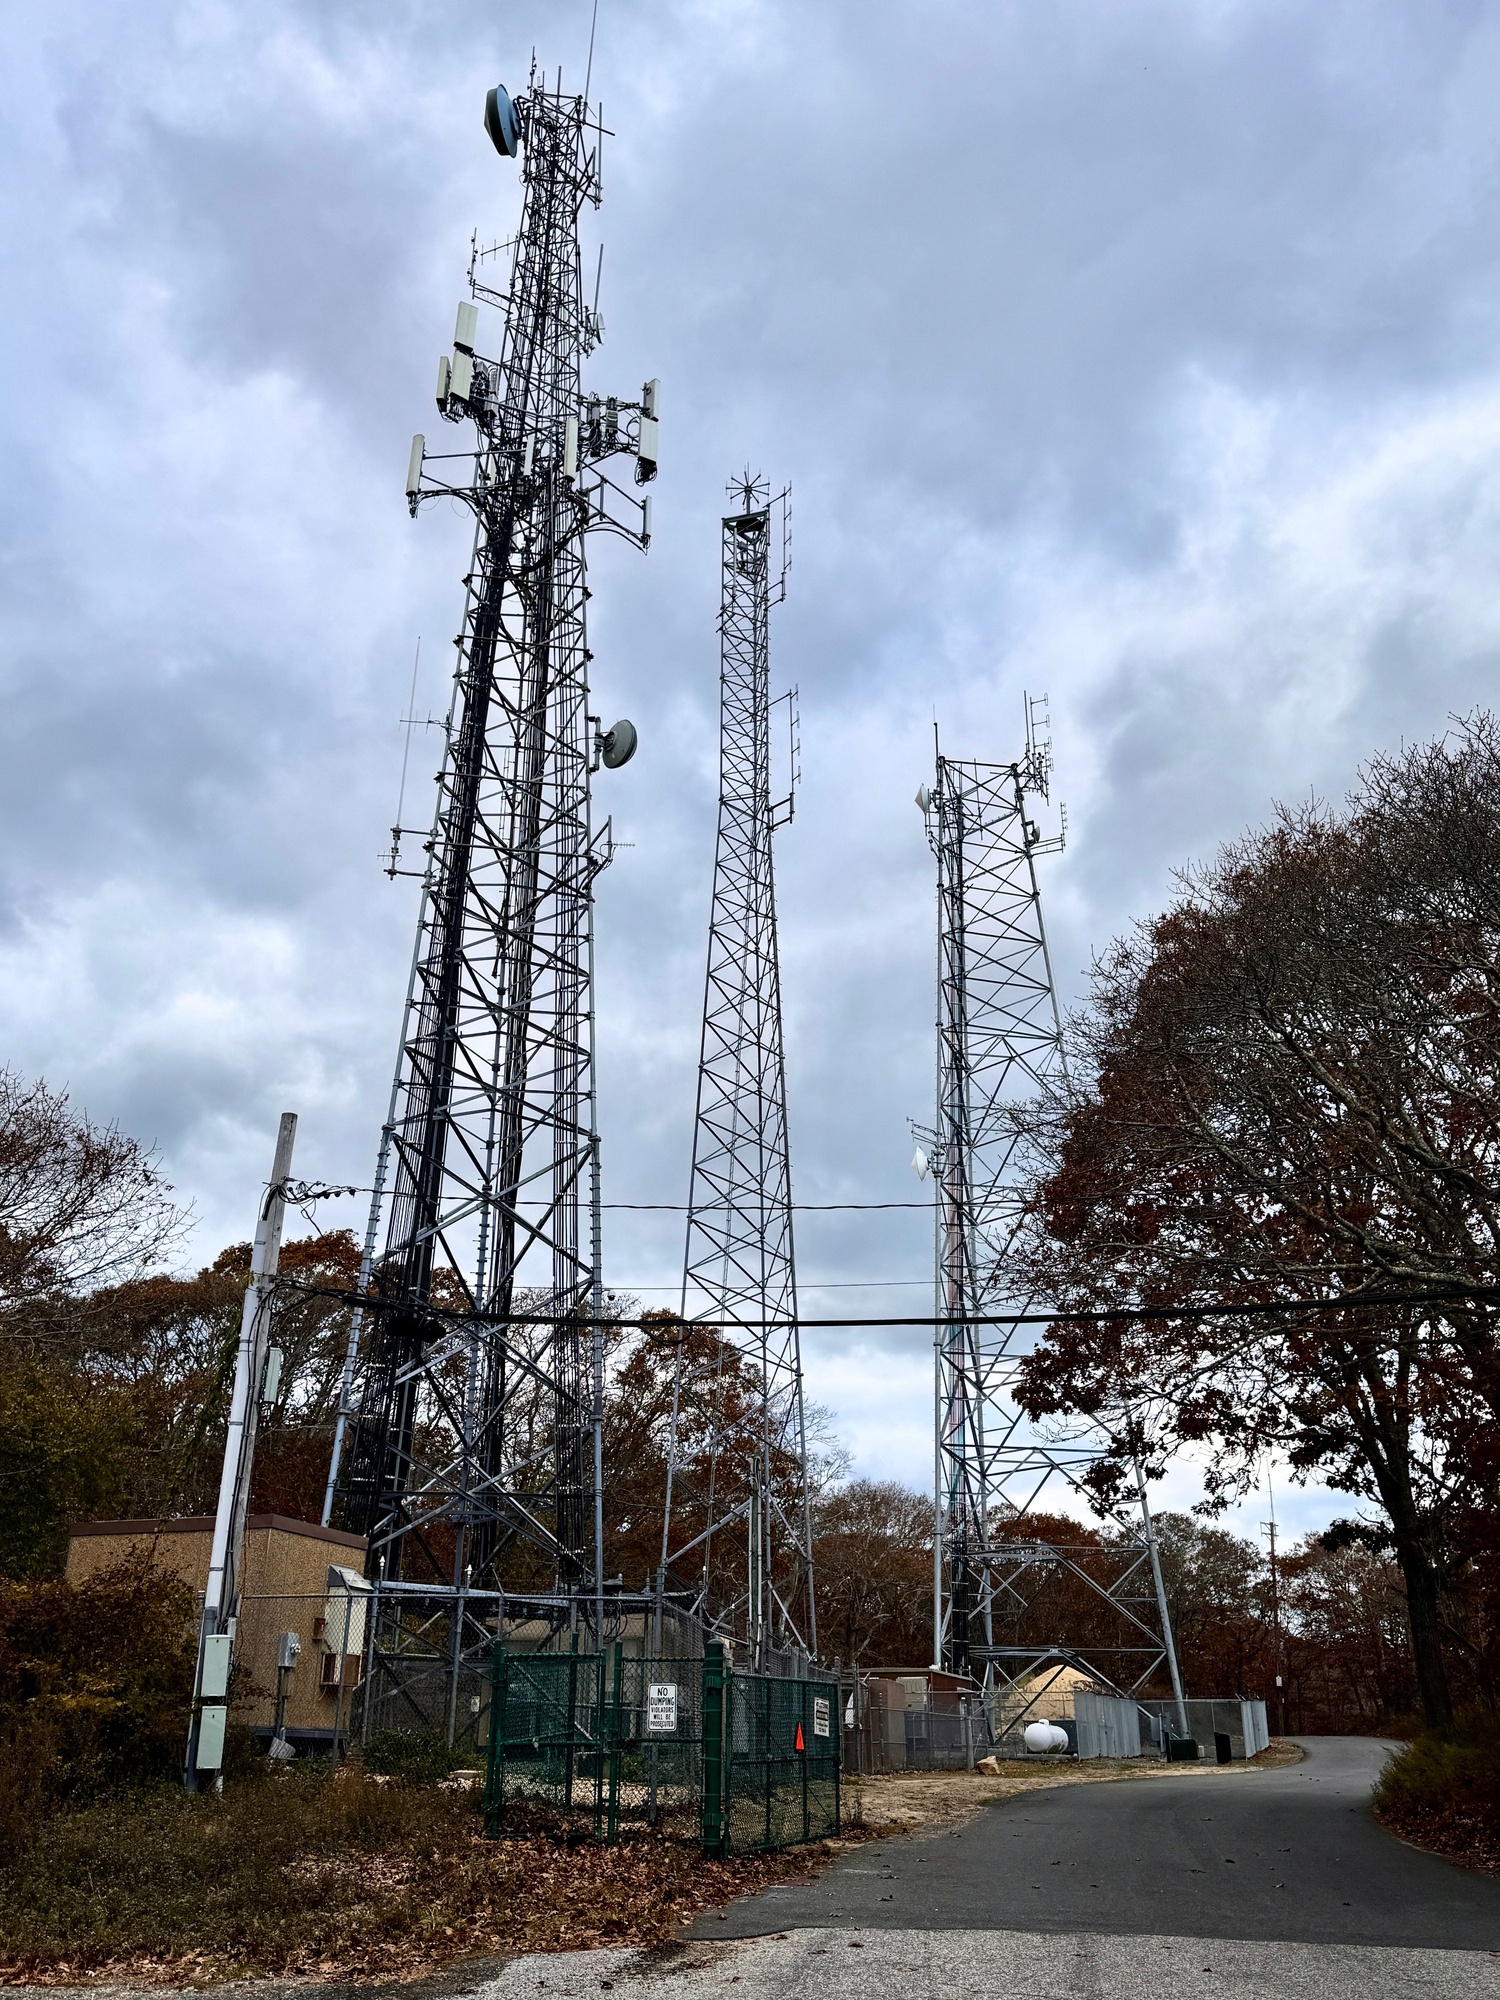 A new tower at the Montauk dump was needed to hold the new radio equipment, and cost nearly $1 million to build.